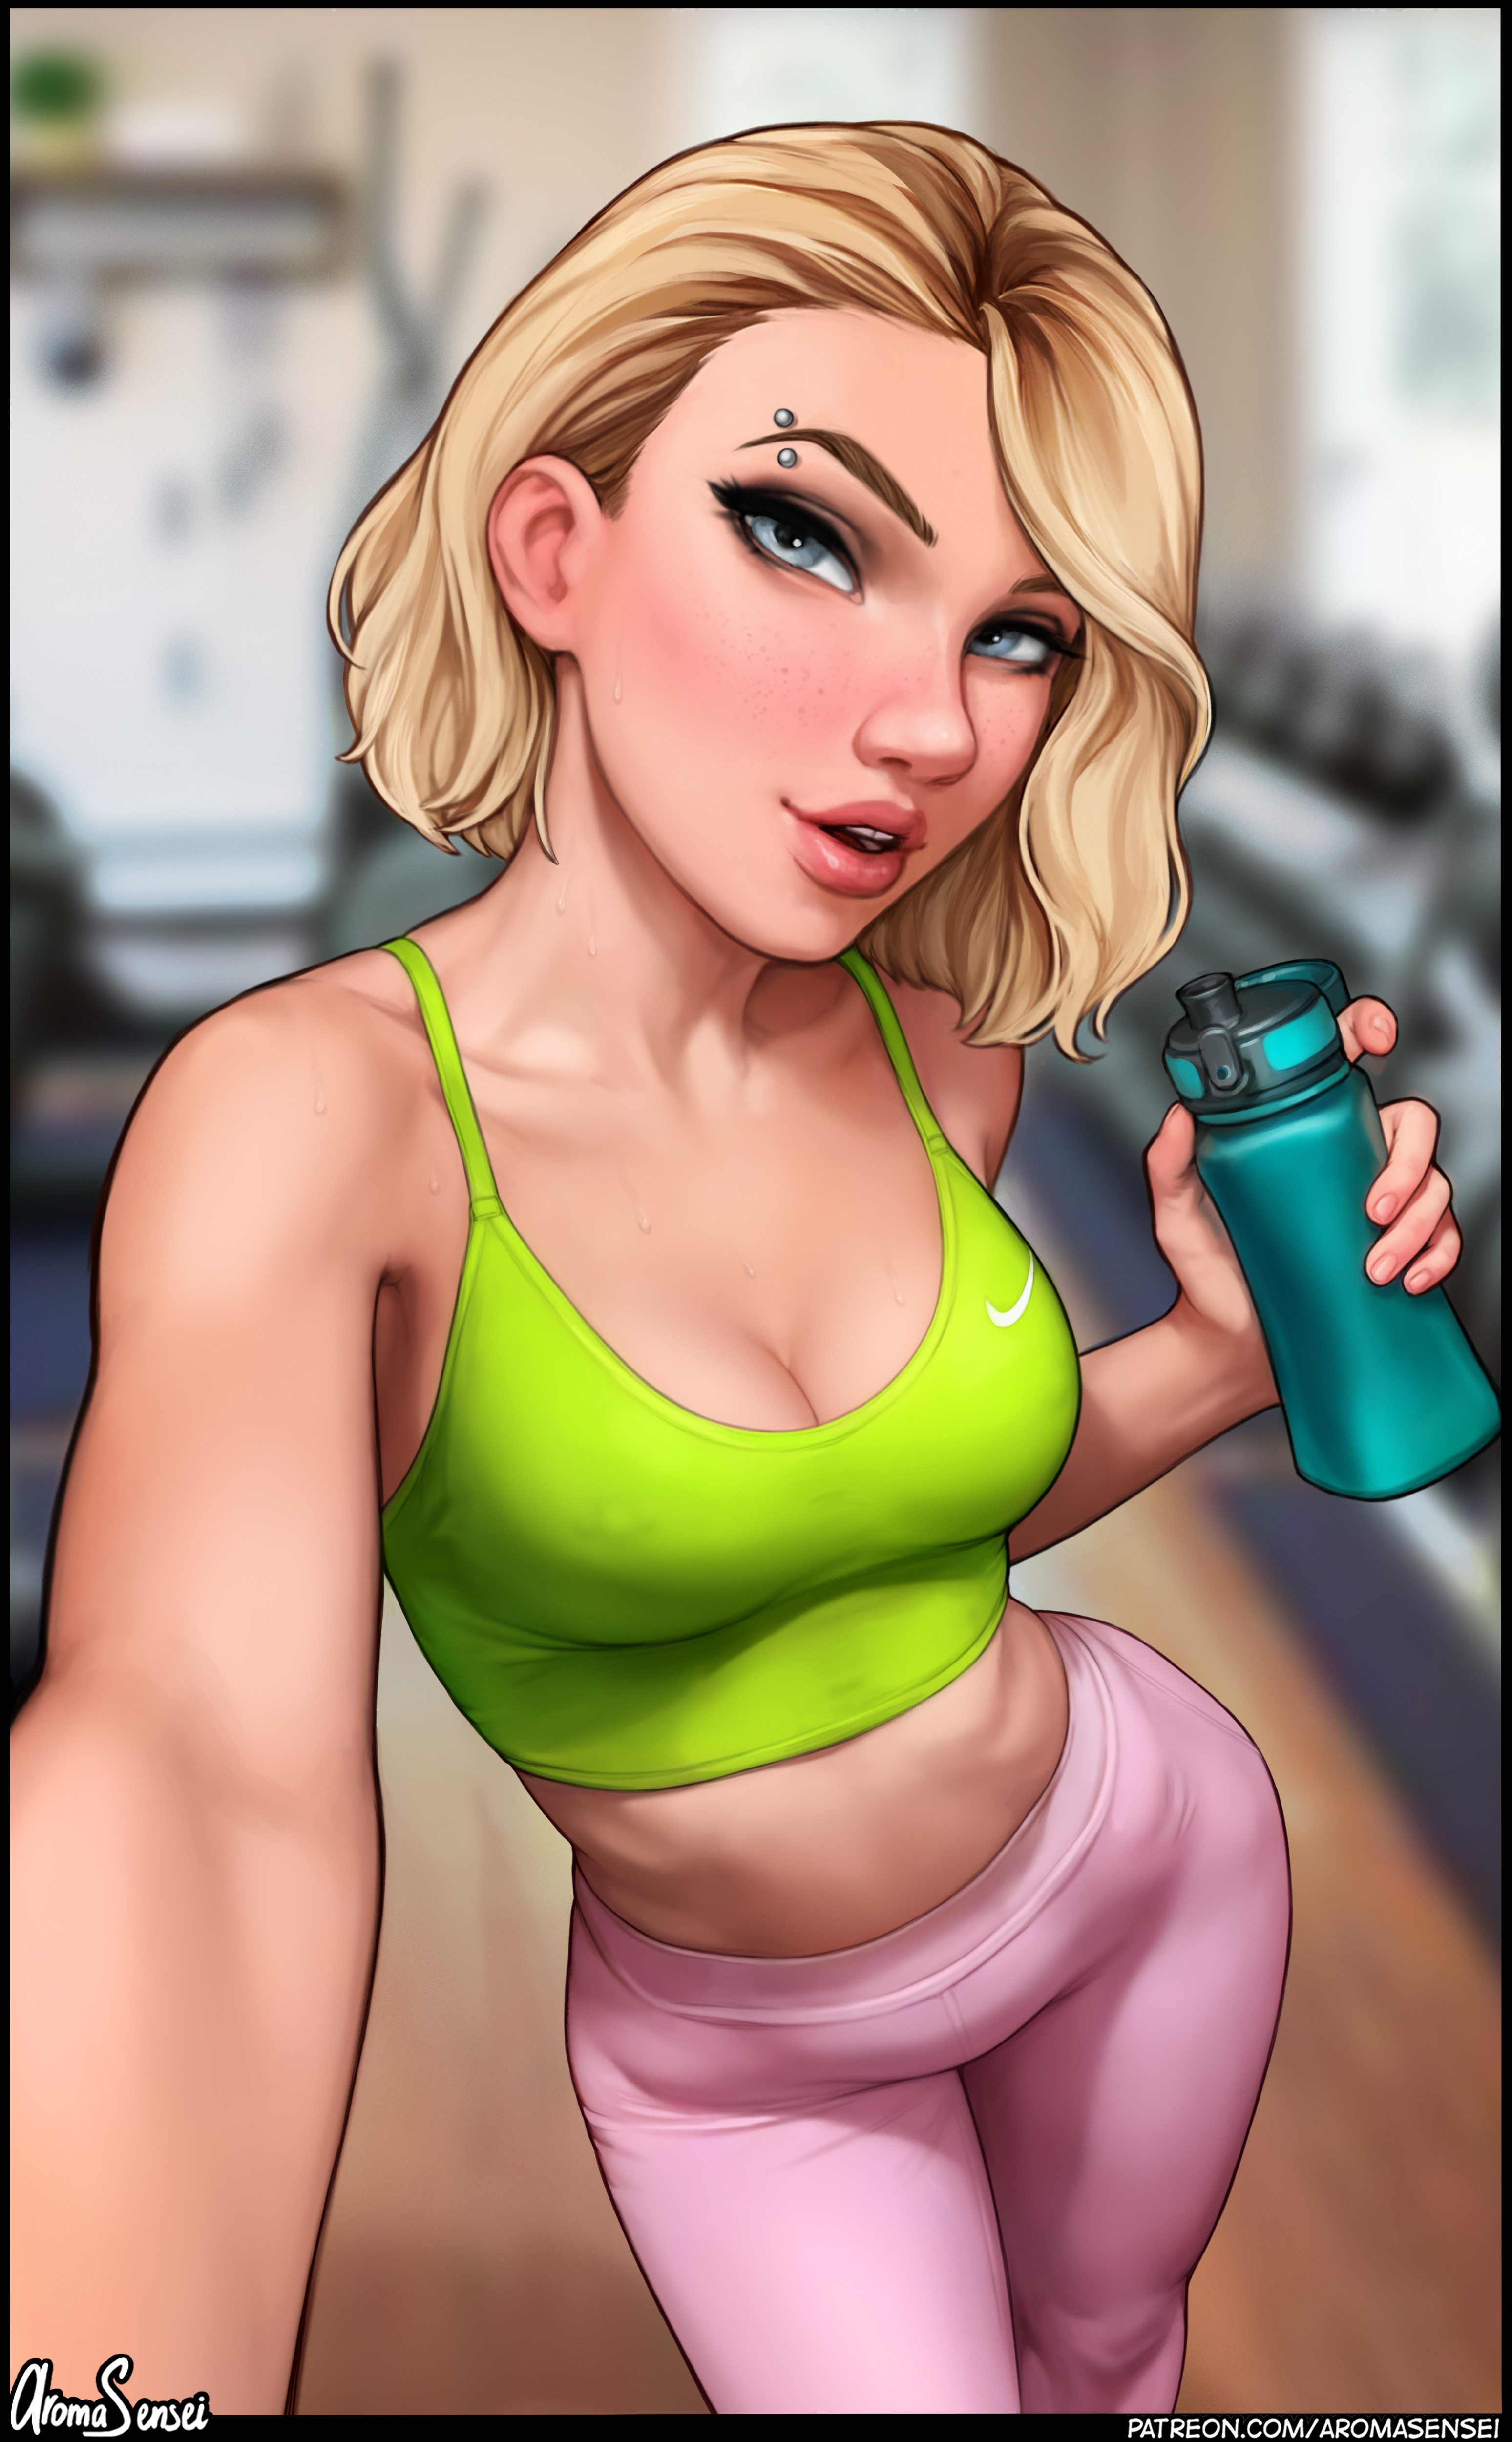 Gwen Stacy Marvel Comics Blonde Gym Clothes Green Top Pierced Eyebrow Parte...